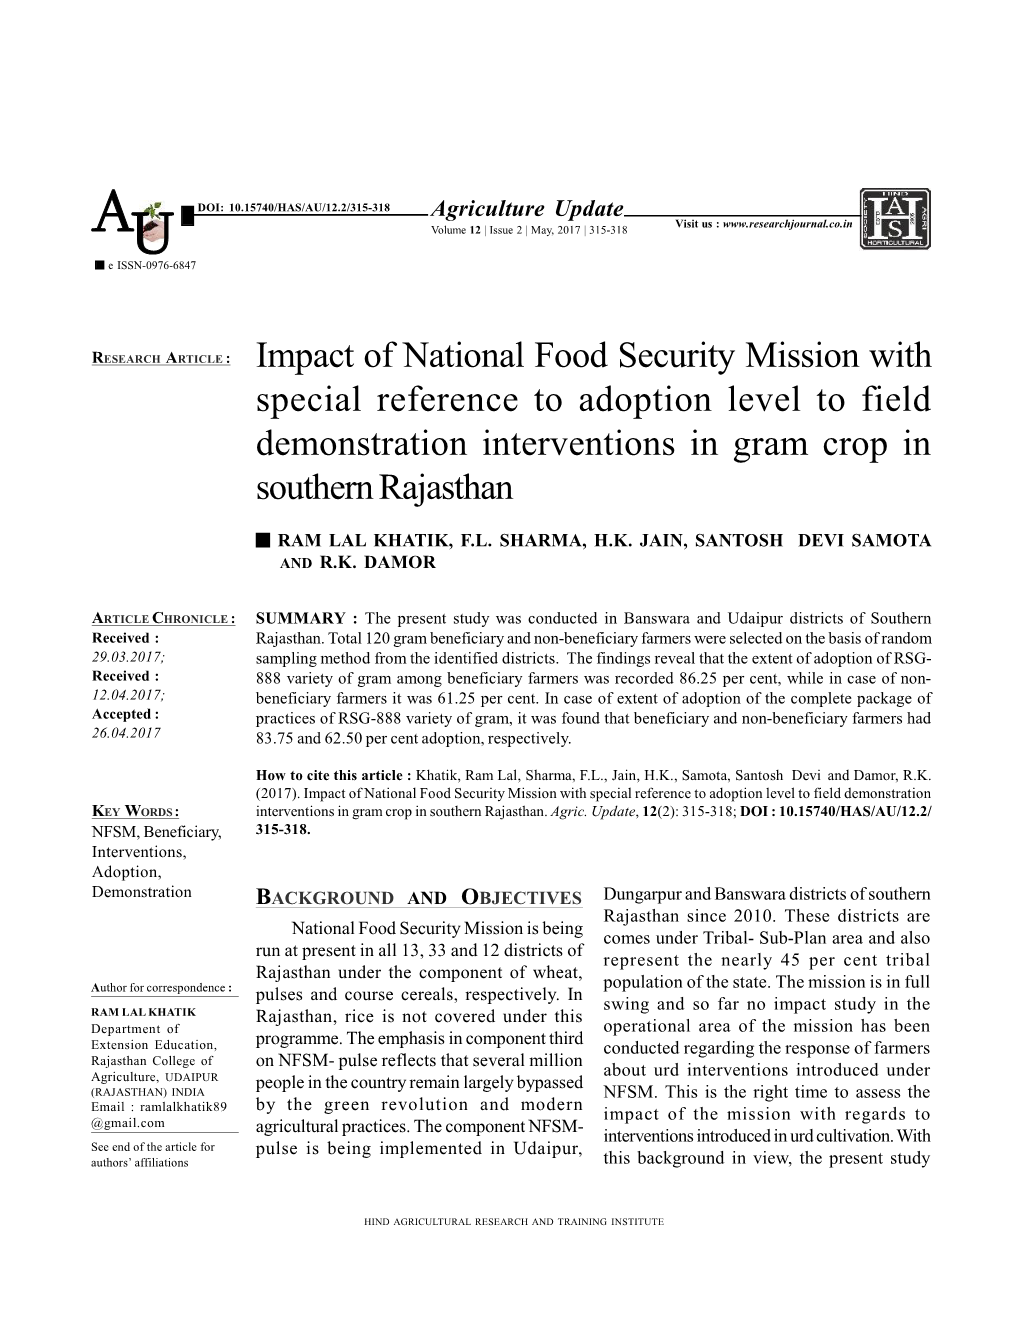 Impact of National Food Security Mission with Special Reference to Adoption Level to Field Demonstration Interventions in Gram Crop in Southern Rajasthan